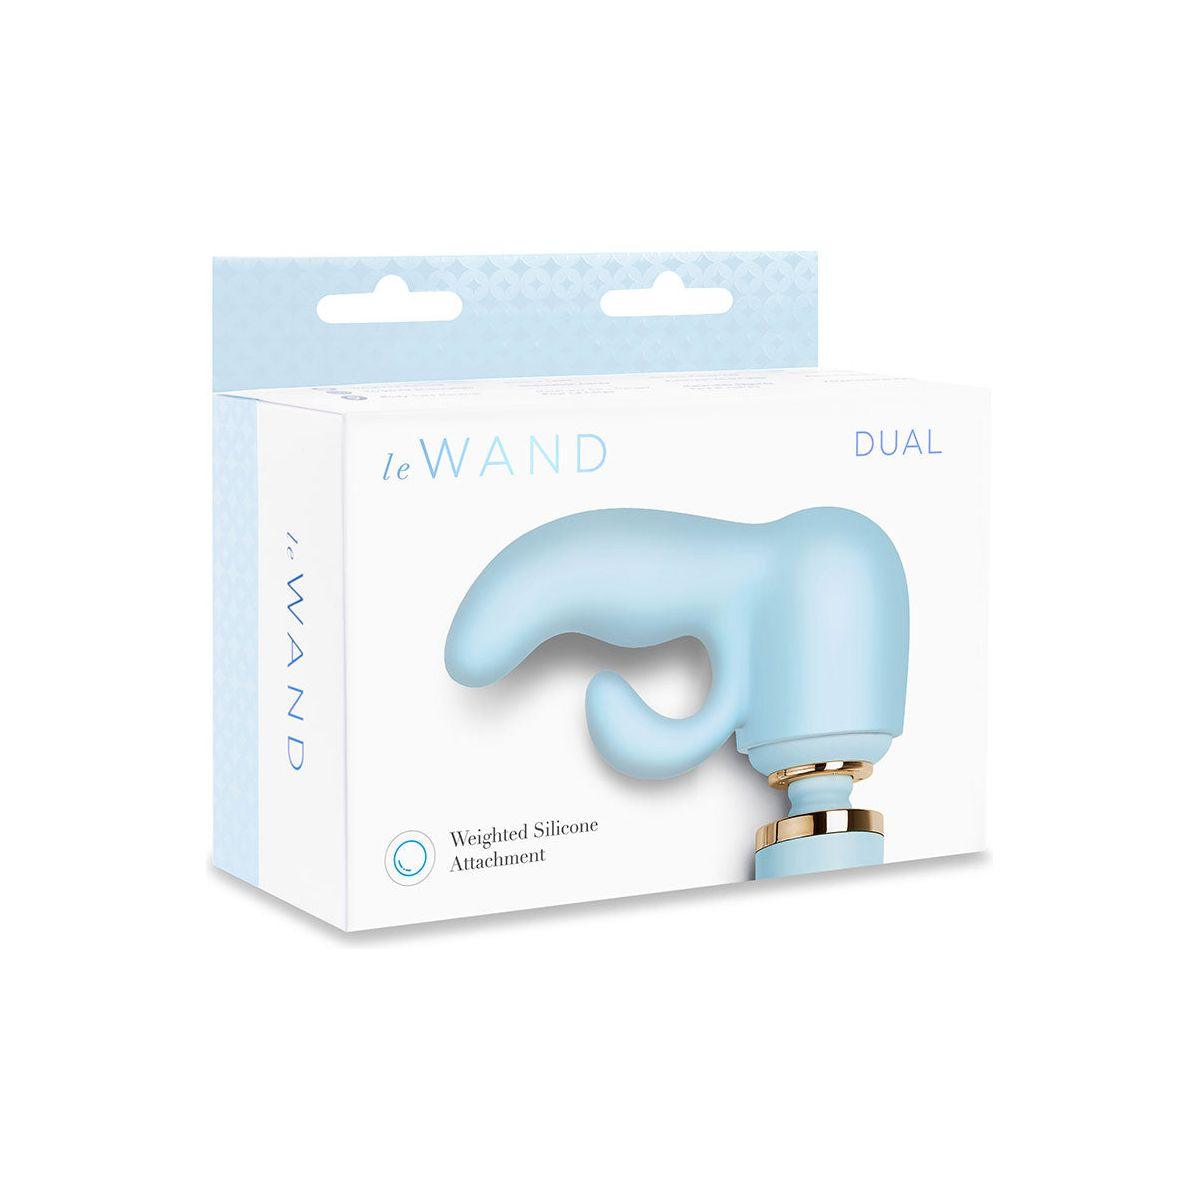 Le Wand Dual Weighted Silicone Attachment - shop enby